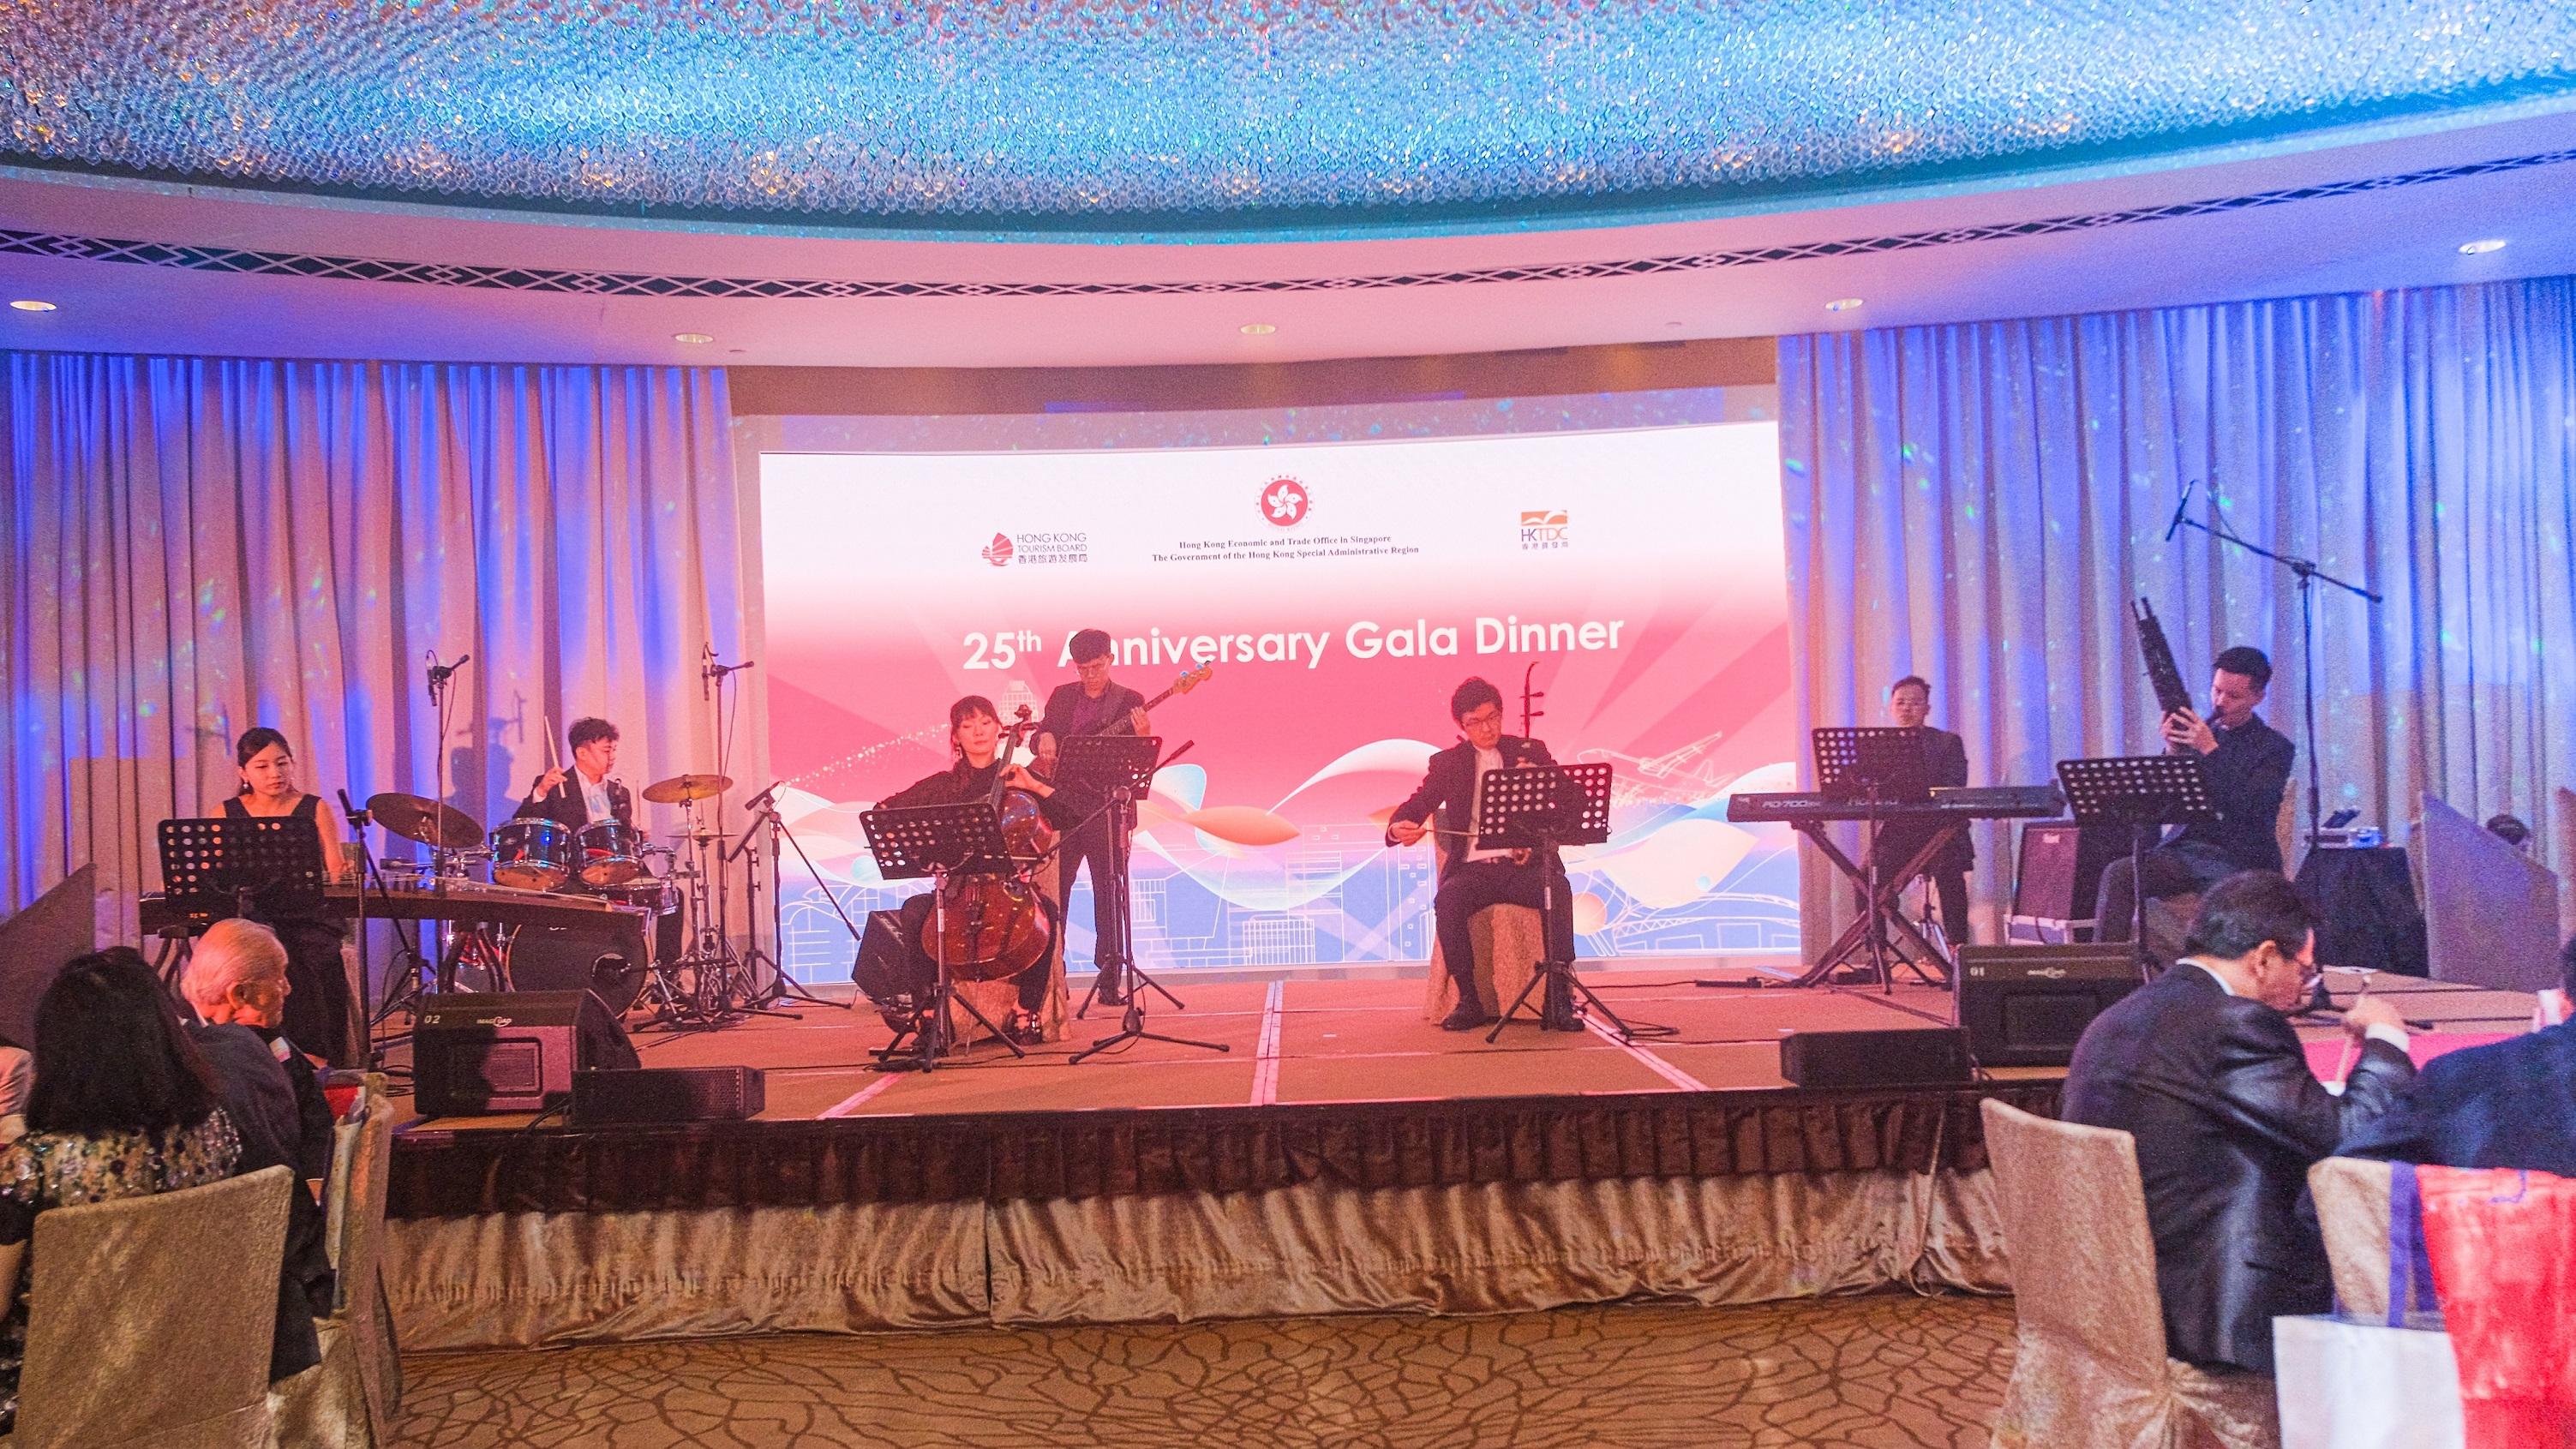 The Hong Kong Economic and Trade Office in Singapore hosted a gala dinner in Singapore today (August 3) in celebration of the 25th anniversary of the establishment of the Hong Kong Special Administrative Region. Photo shows a group of Hong Kong and Singapore musicians performing at the gala dinner, showcasing a successful cultural collaboration of young talents from both places.